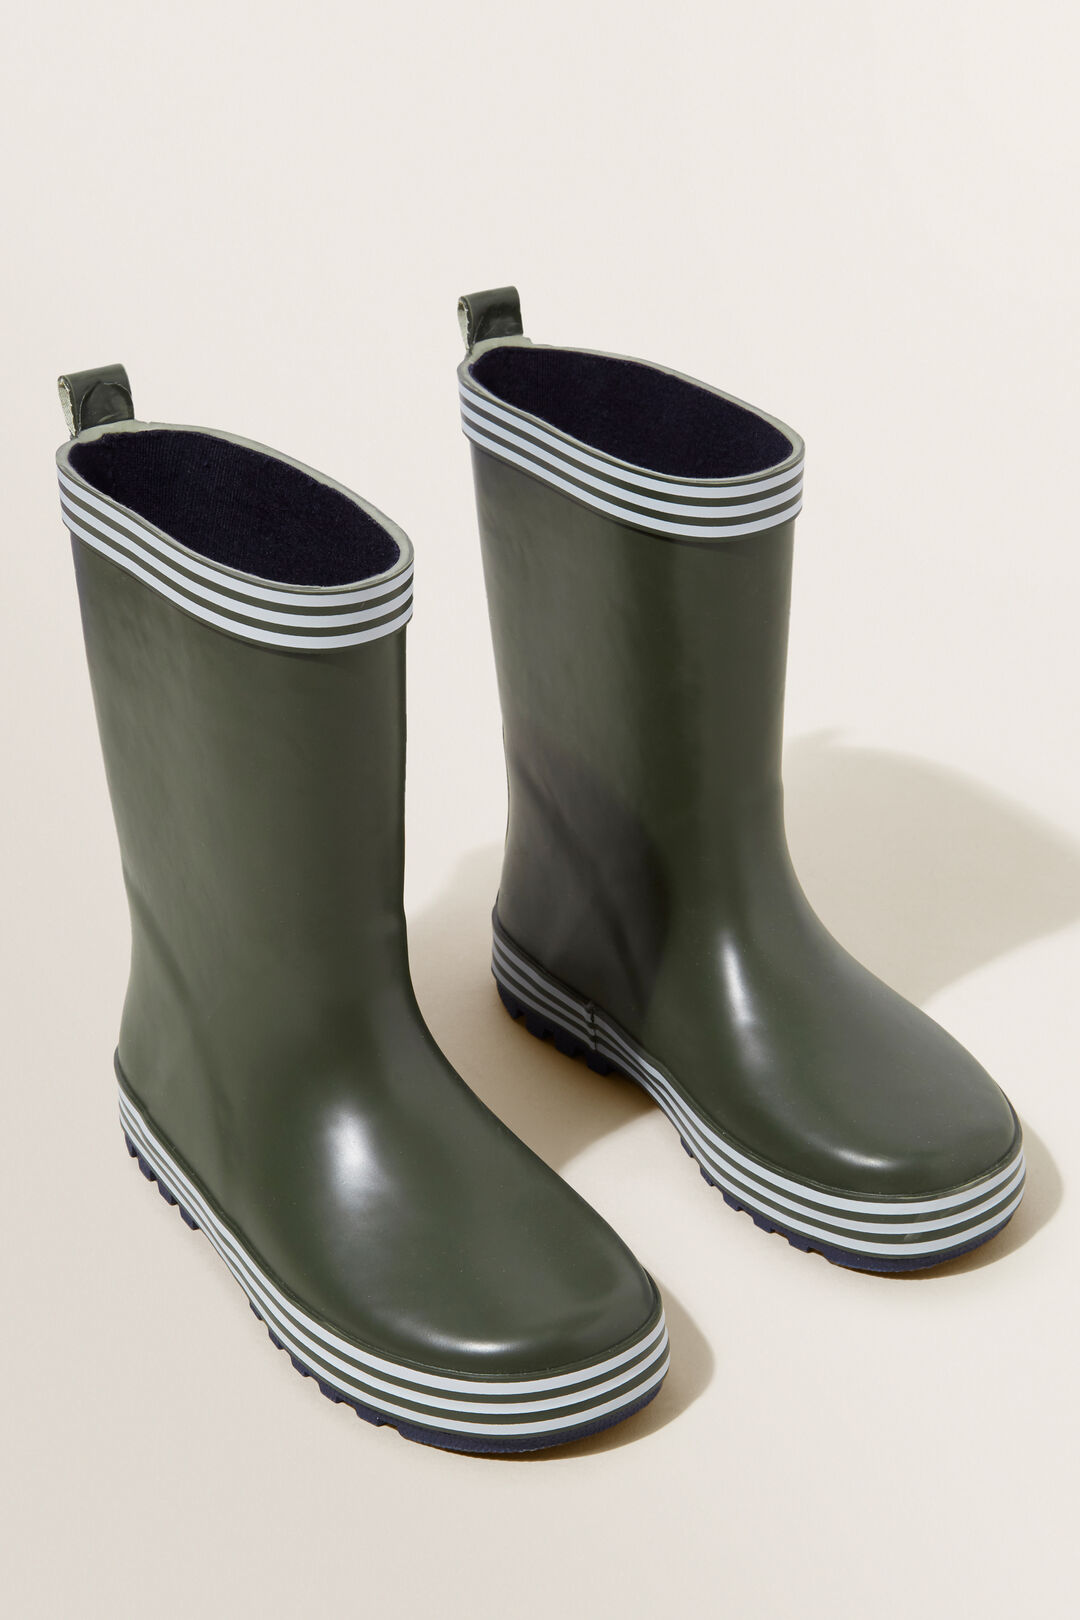 Forest Green Gumboot  Forest Green  hi-res